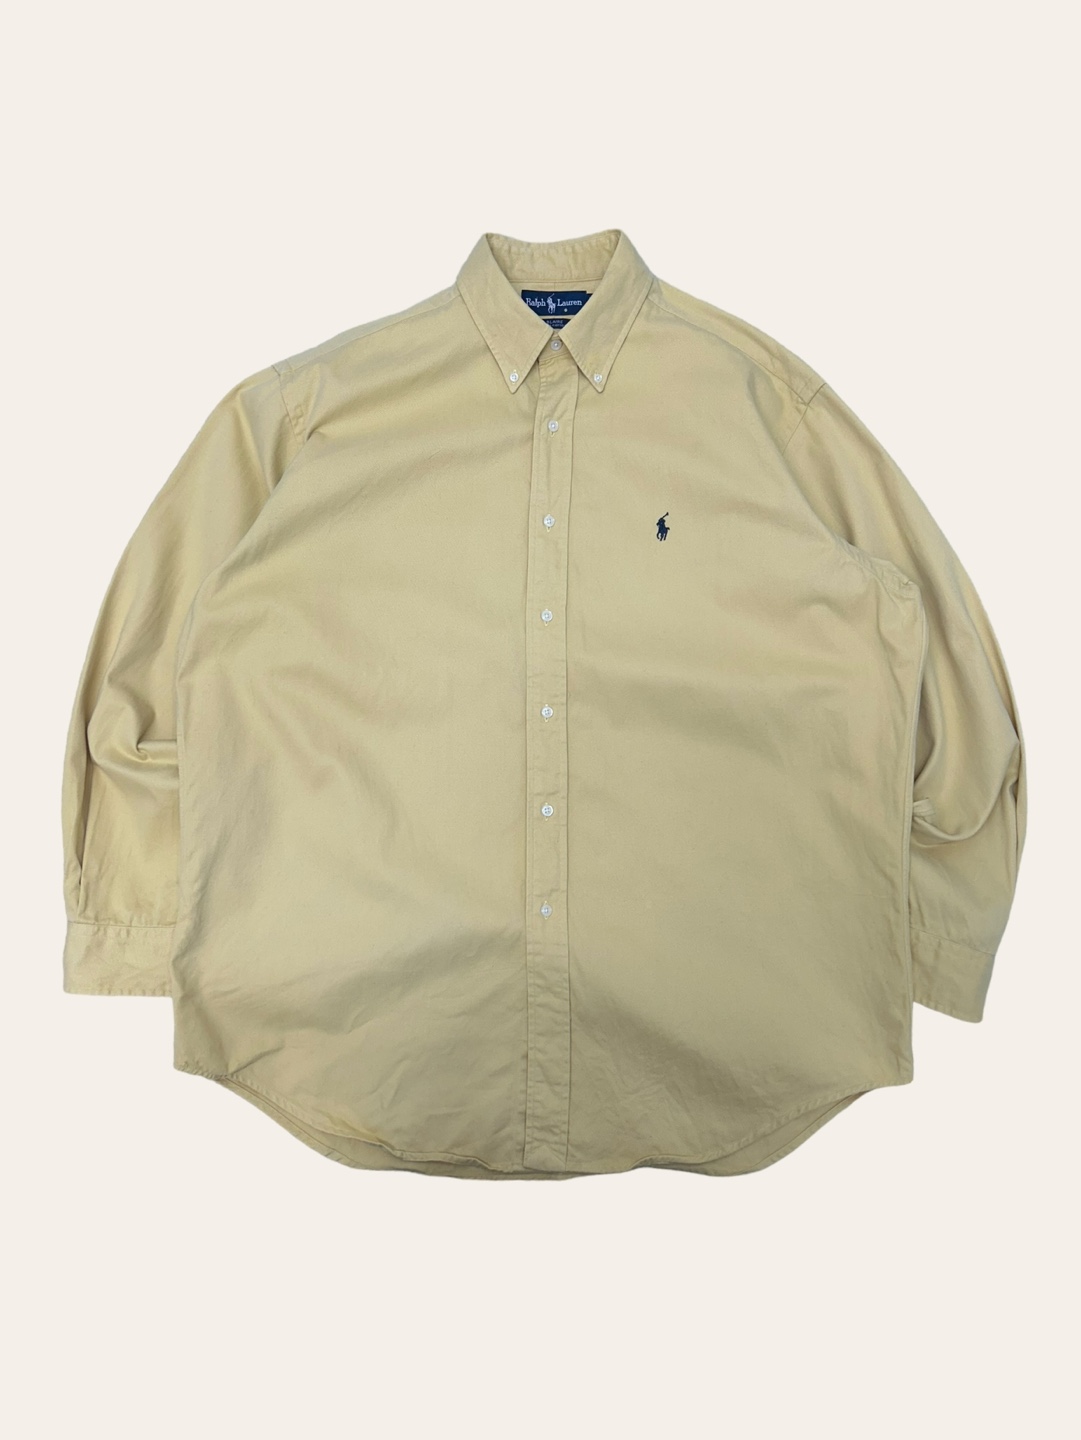 (From USA)Polo ralph lauren mustard color solid shirt L